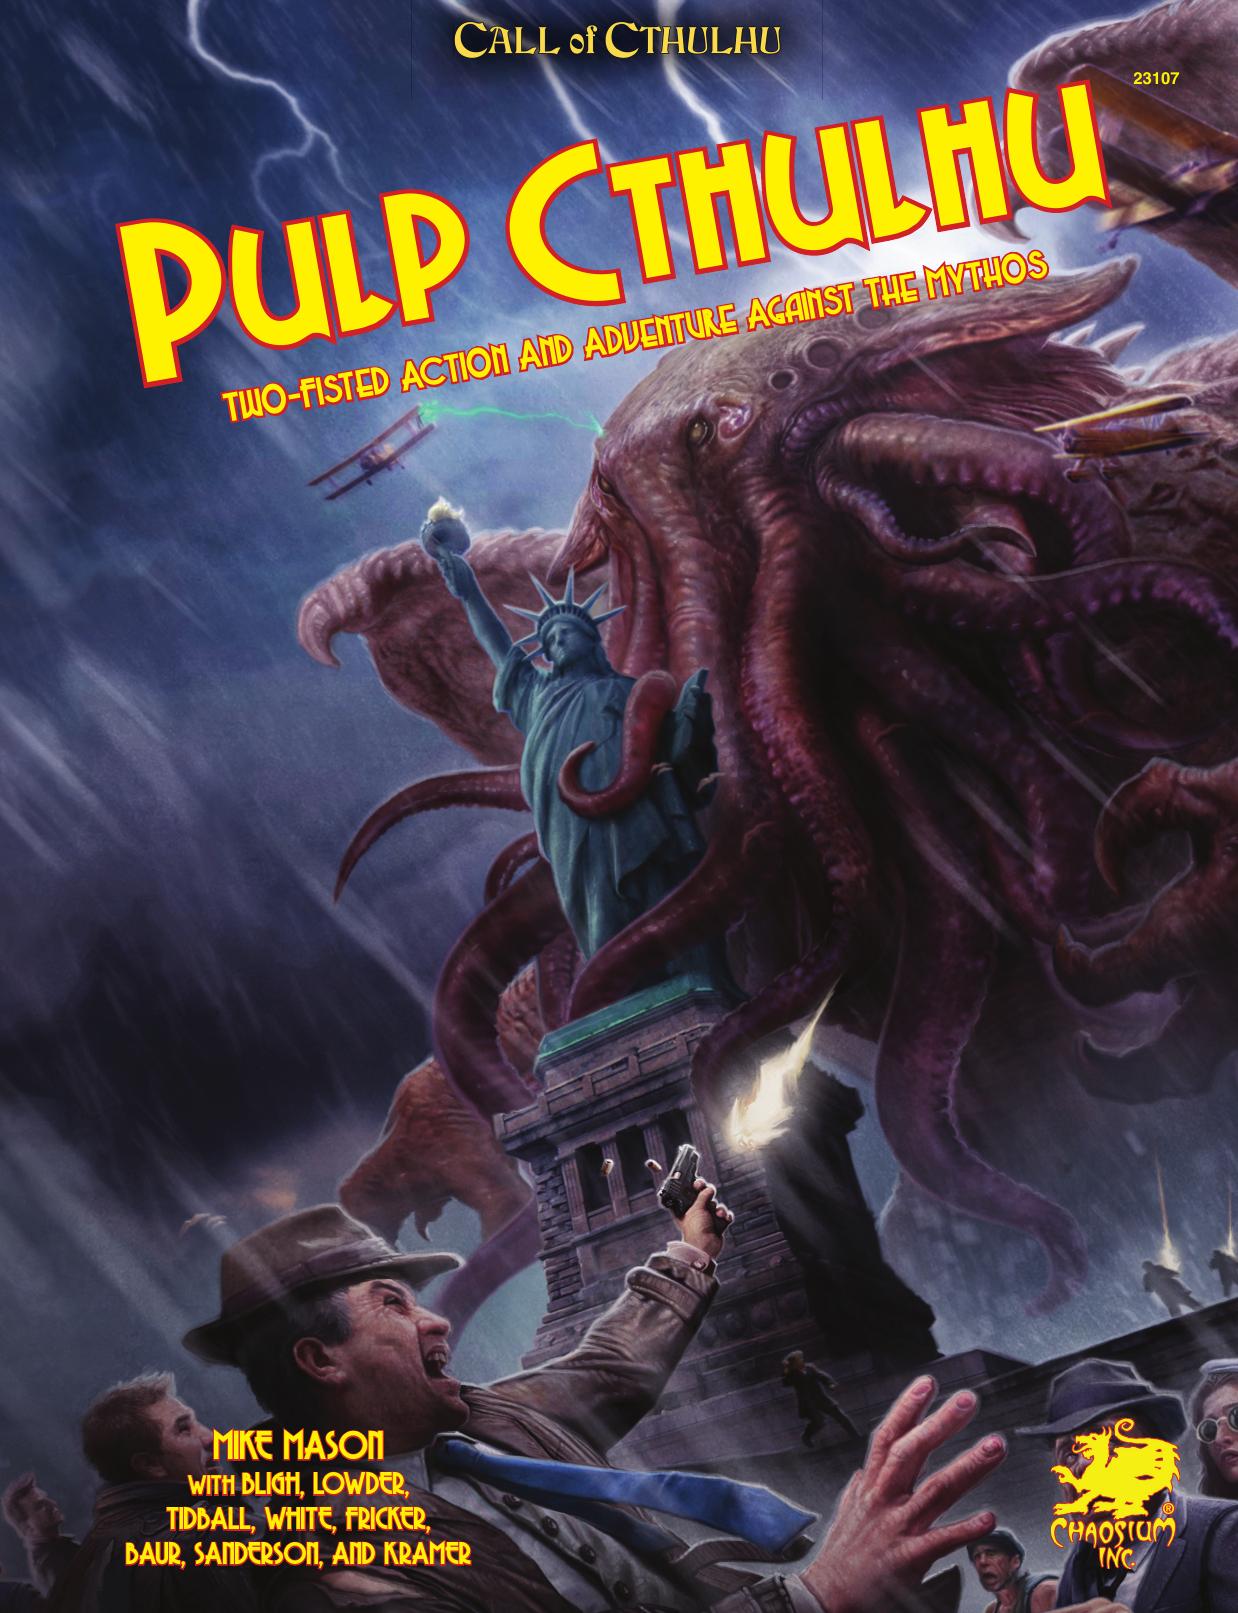 Call of Cthulhu: Pulp Cthulhu - Two-Fisted Action & Adventure Against The Mythos